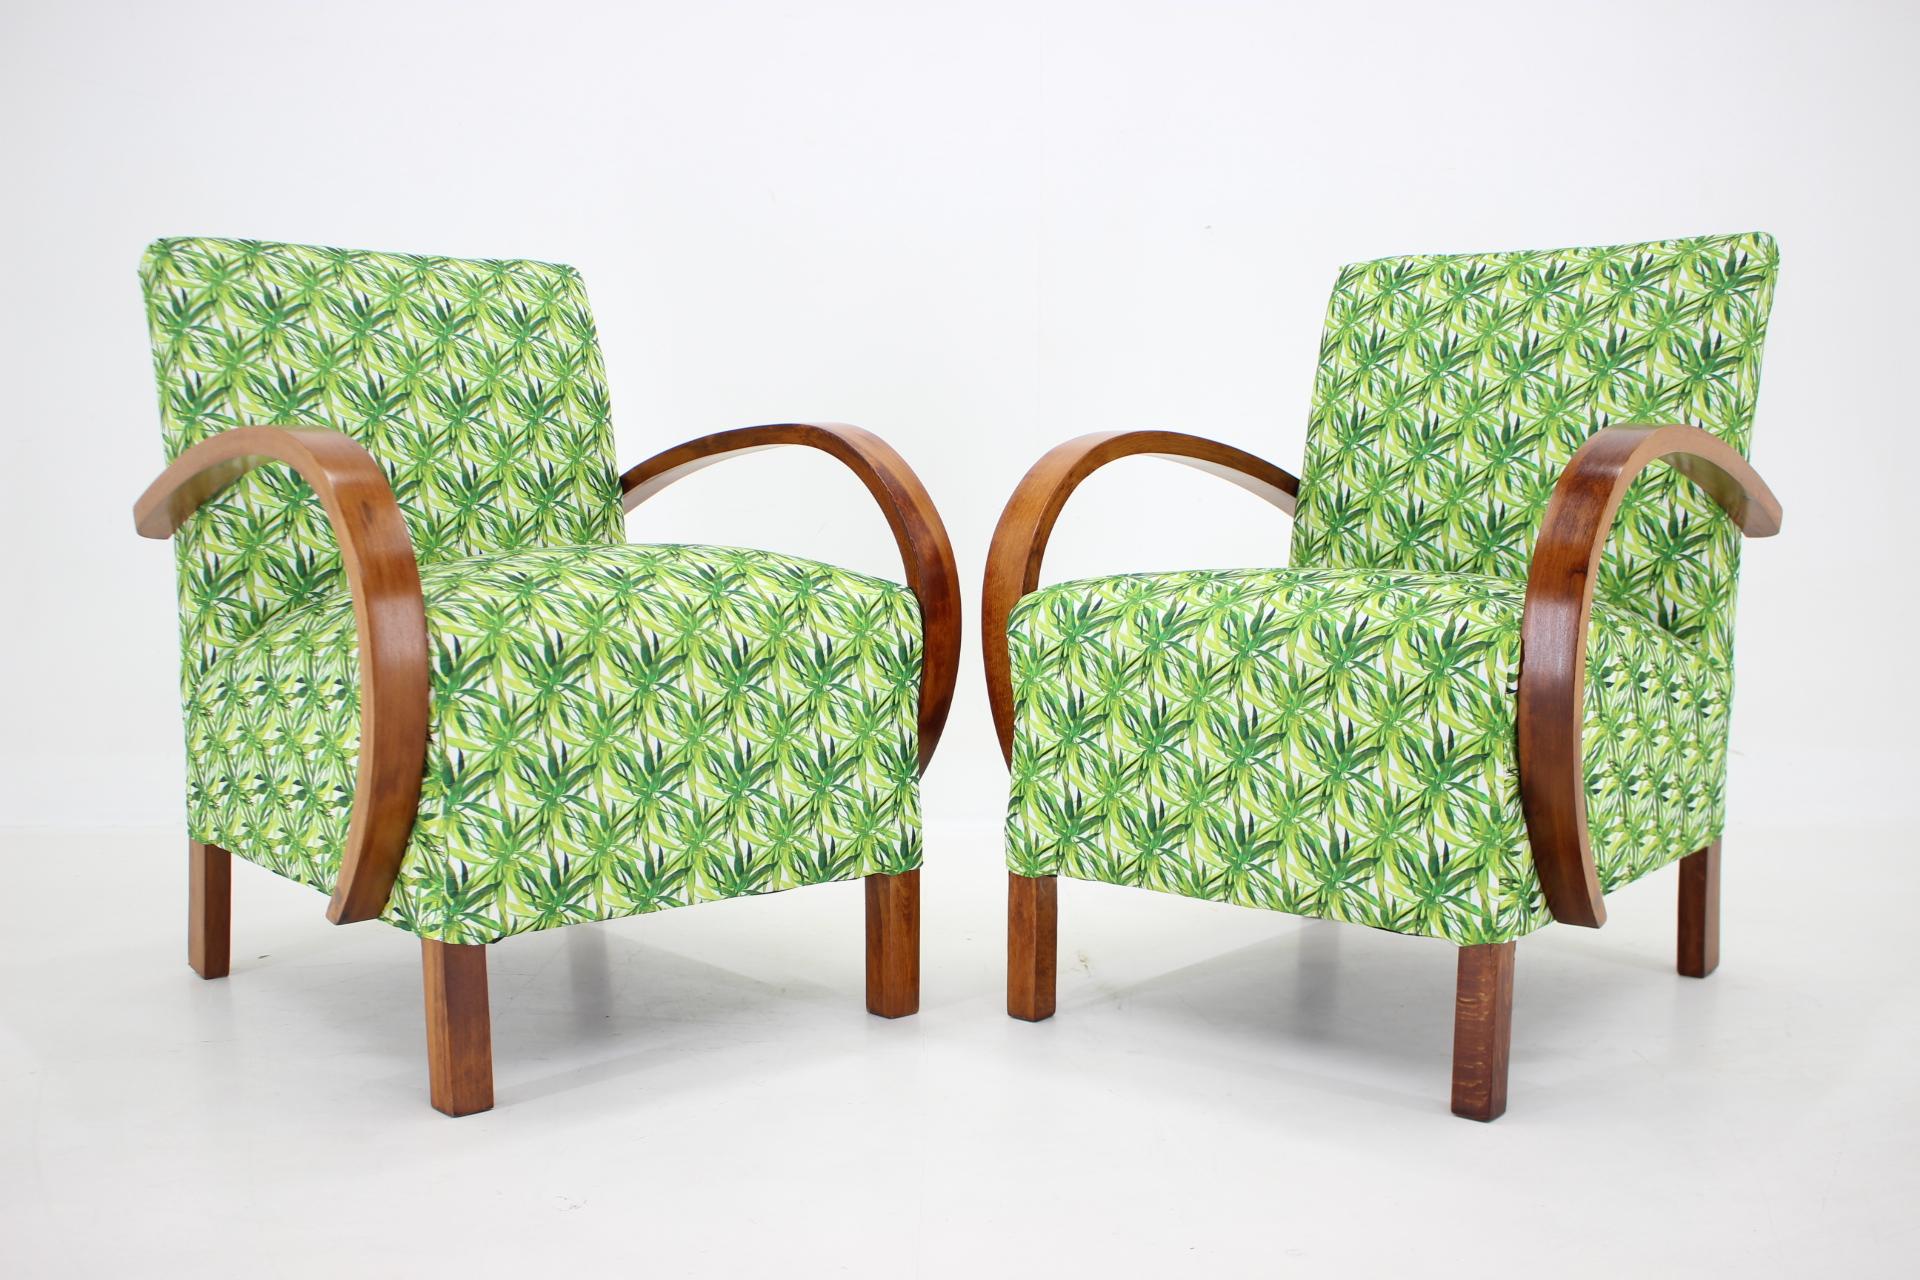 - Newly upholstered 
- The wooden parts have been refurbished 
- The seat height is 43 cm 